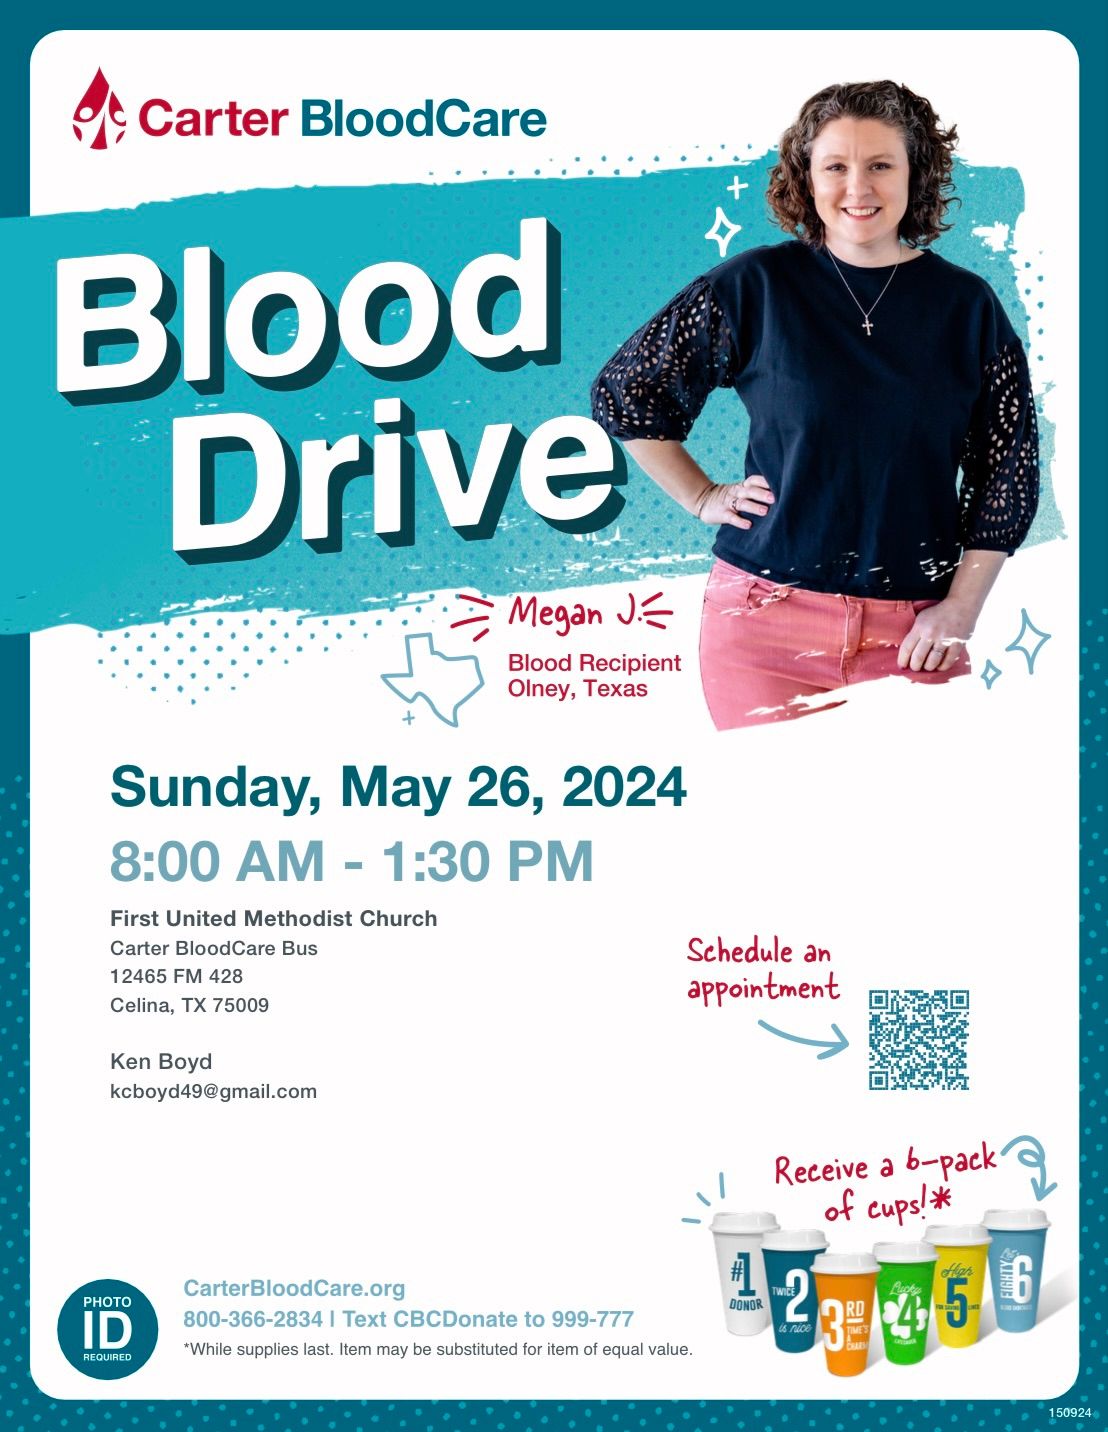 Carter Blood Care Blood Drive